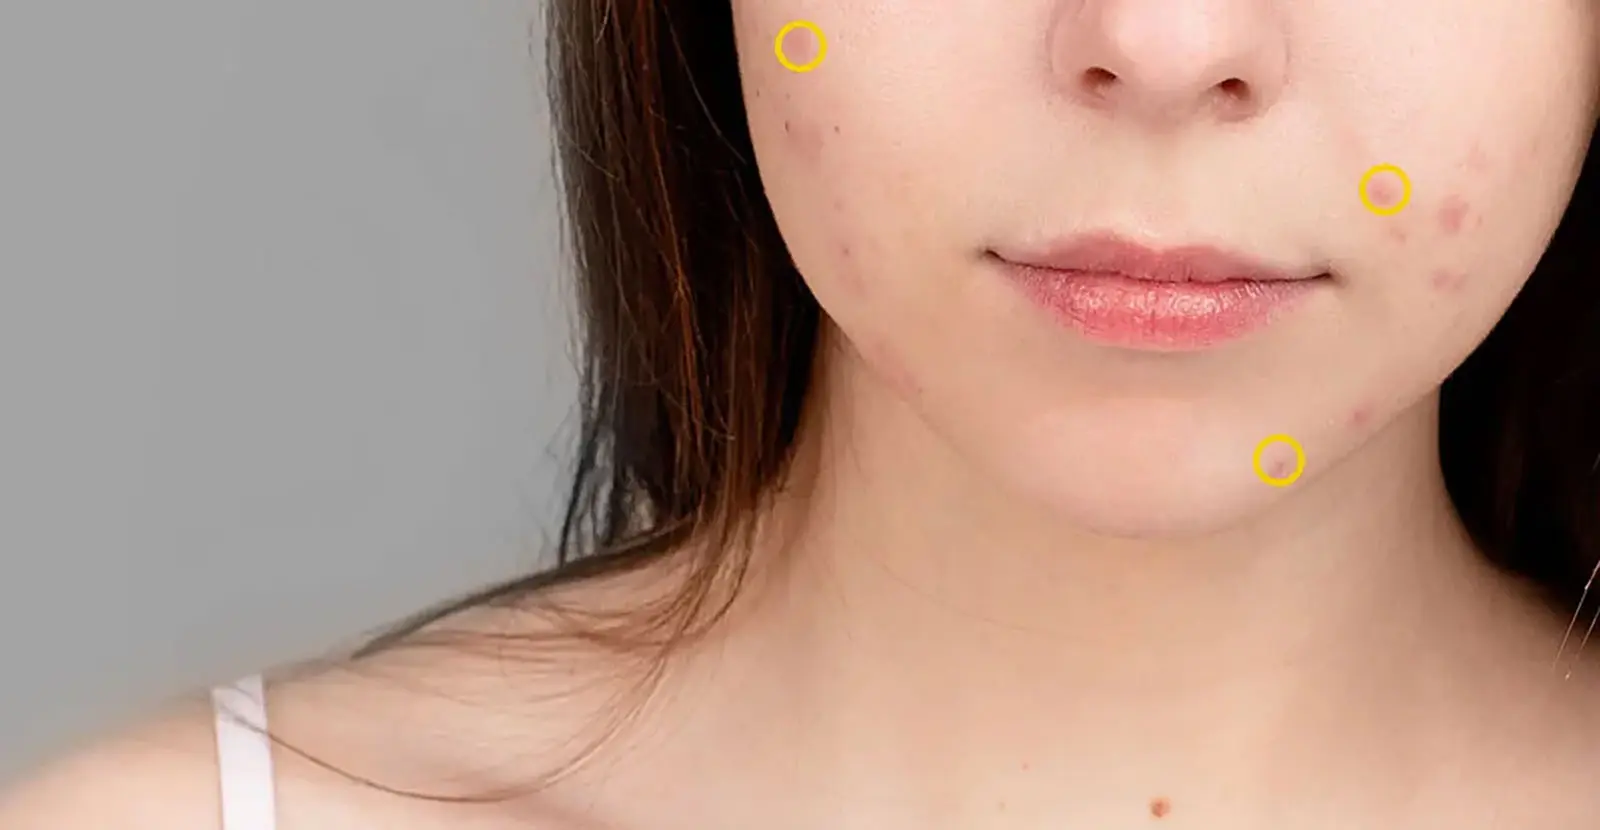 What your acne is telling you based on face mapping